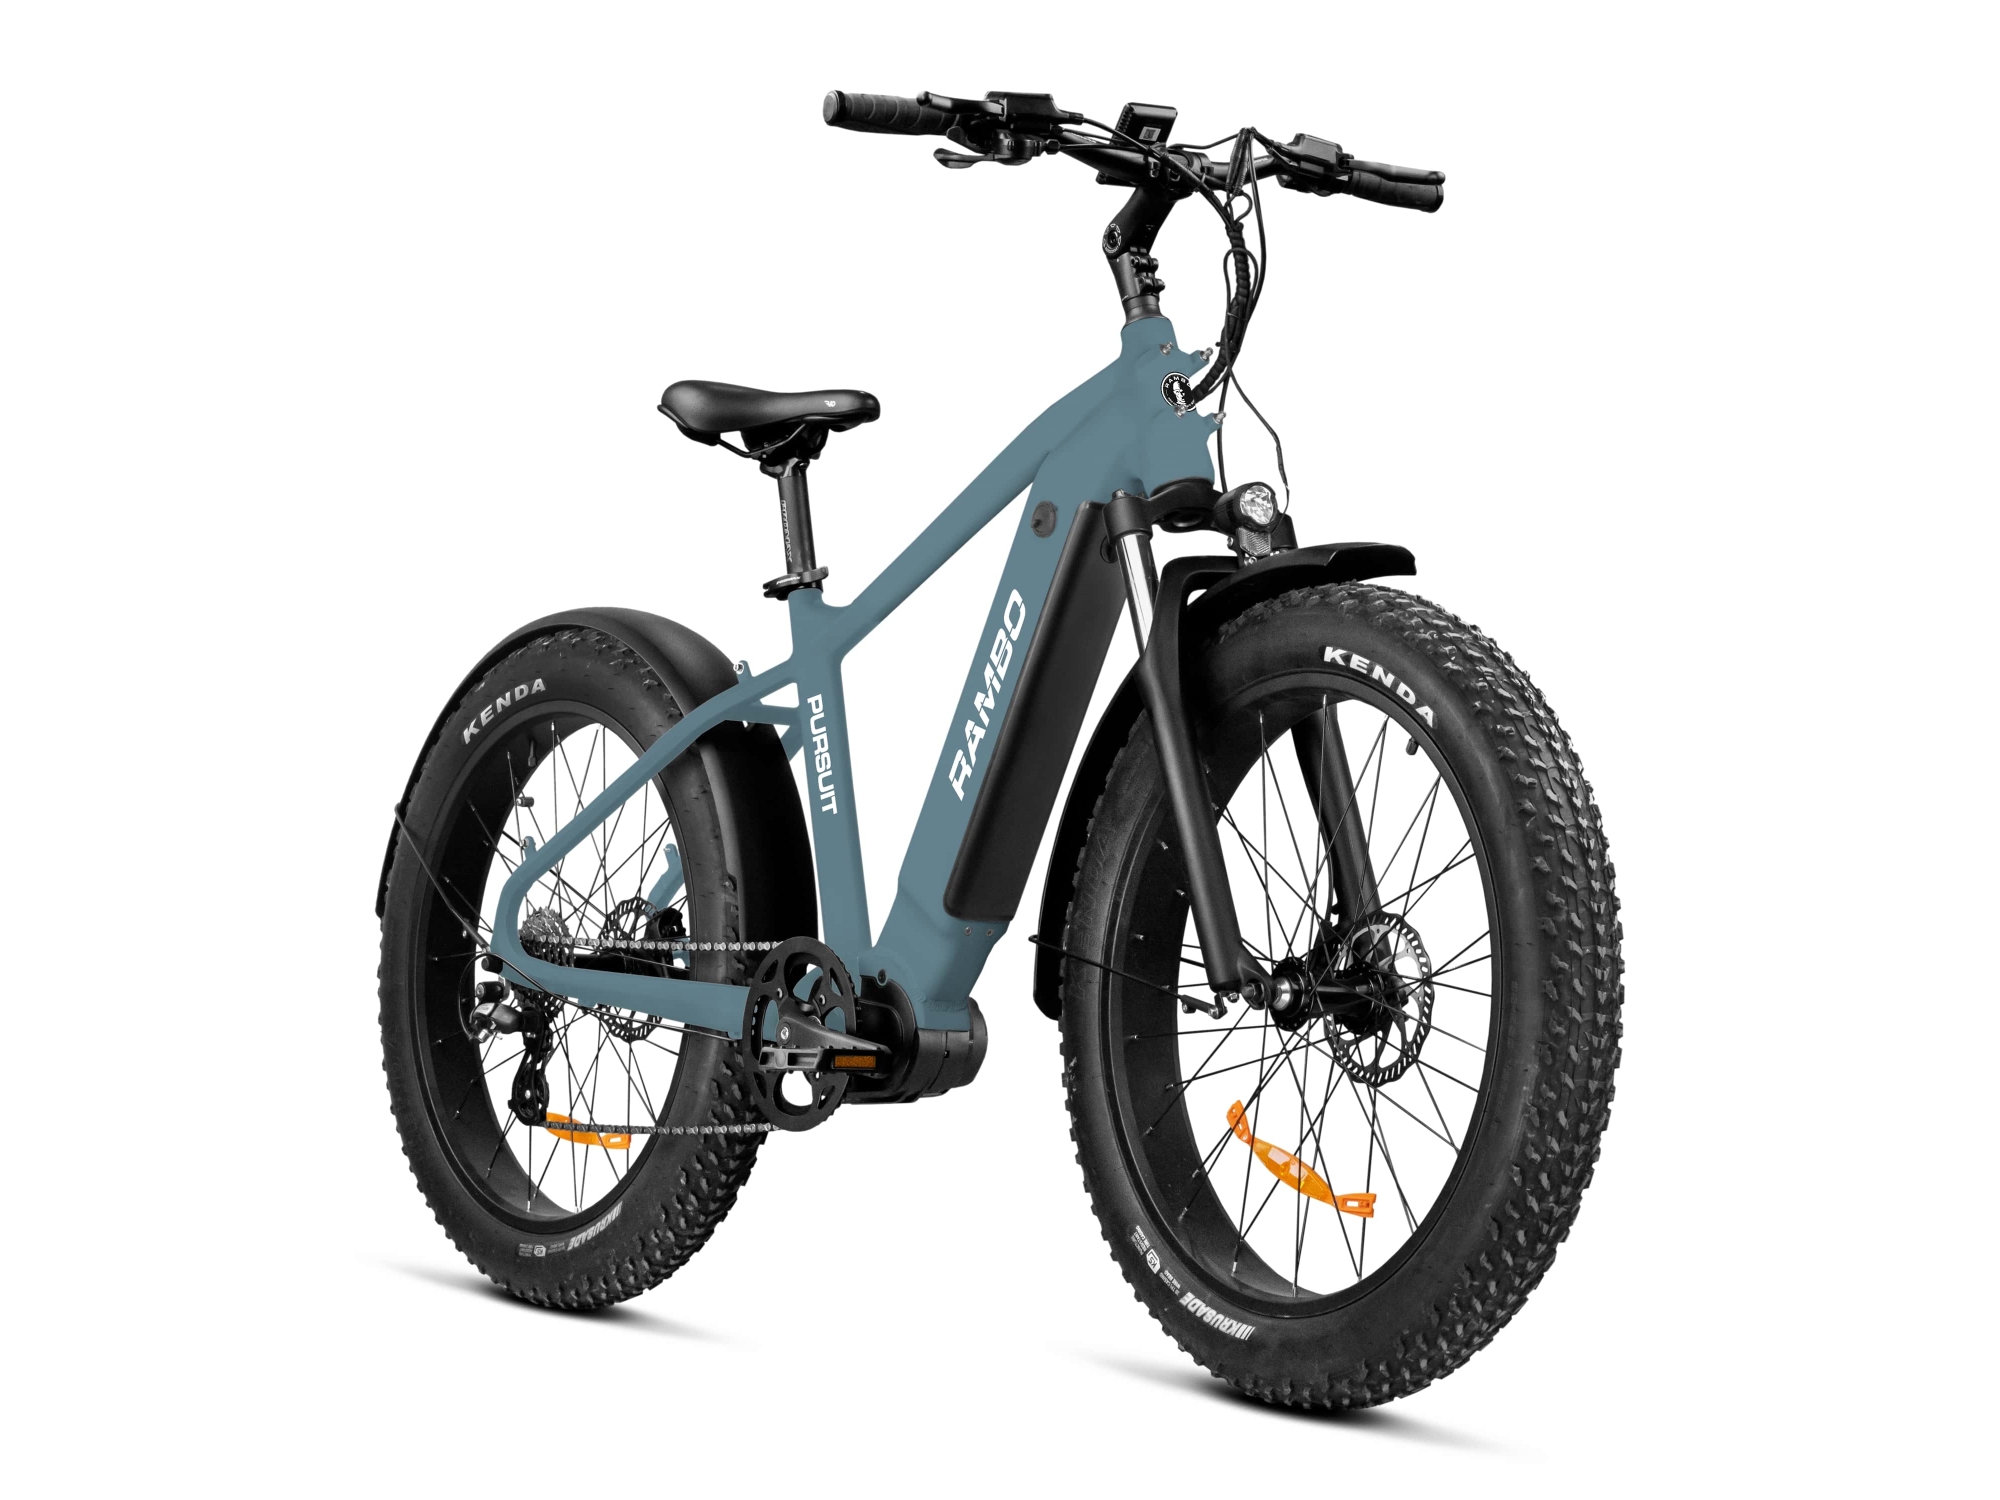 Rambo The PURSUIT 2.0 750W Full Frame - Grey